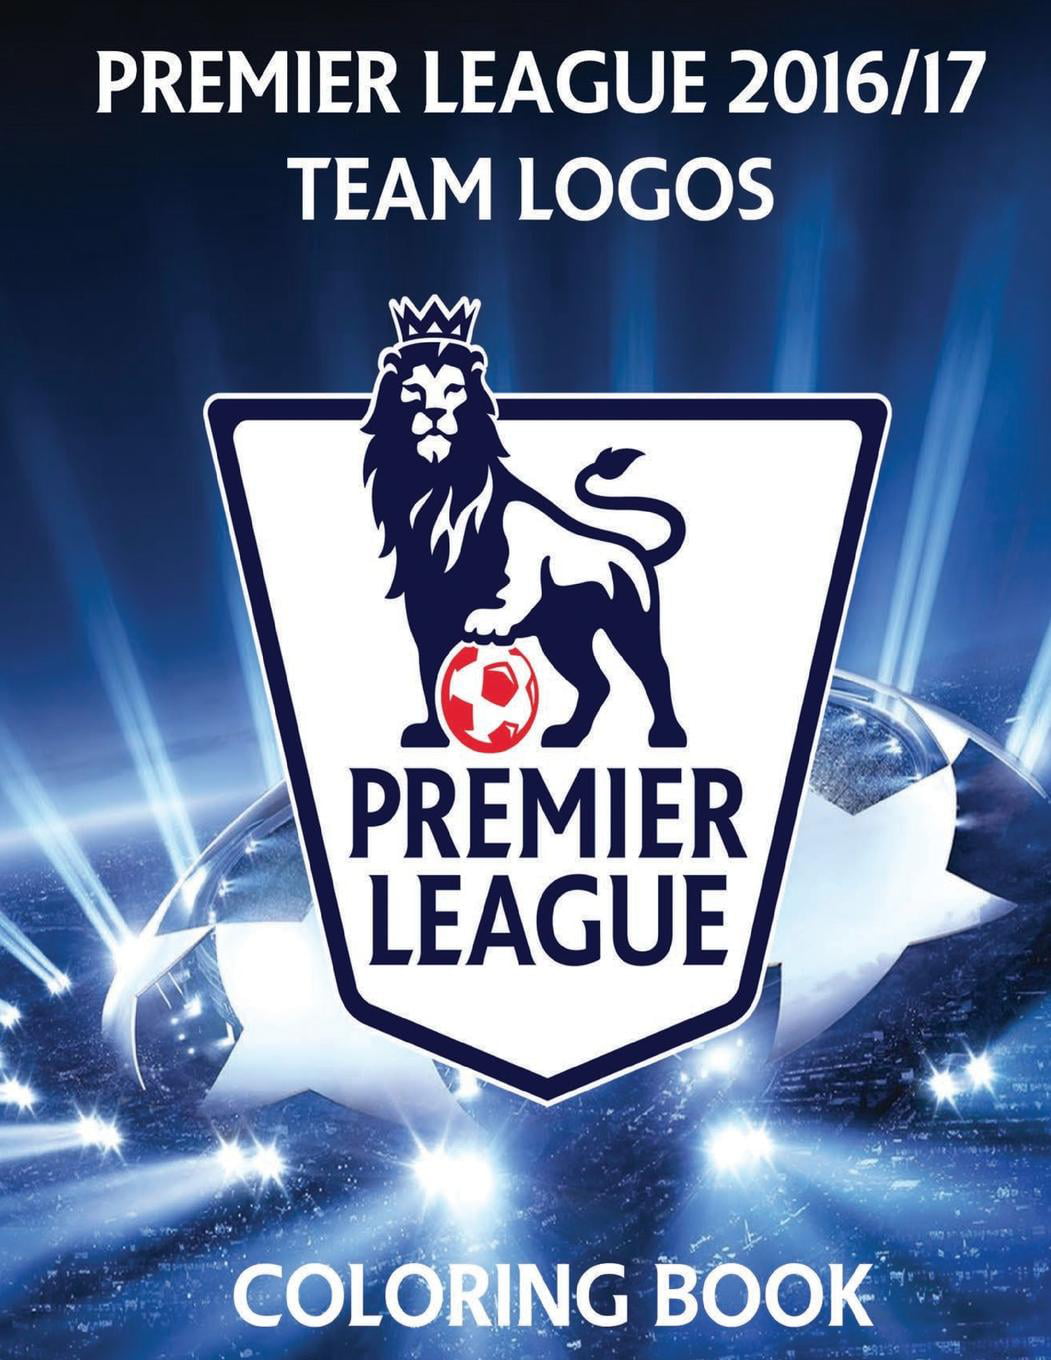 Premier League Team Logos Coloring Book All The Team Logos From The